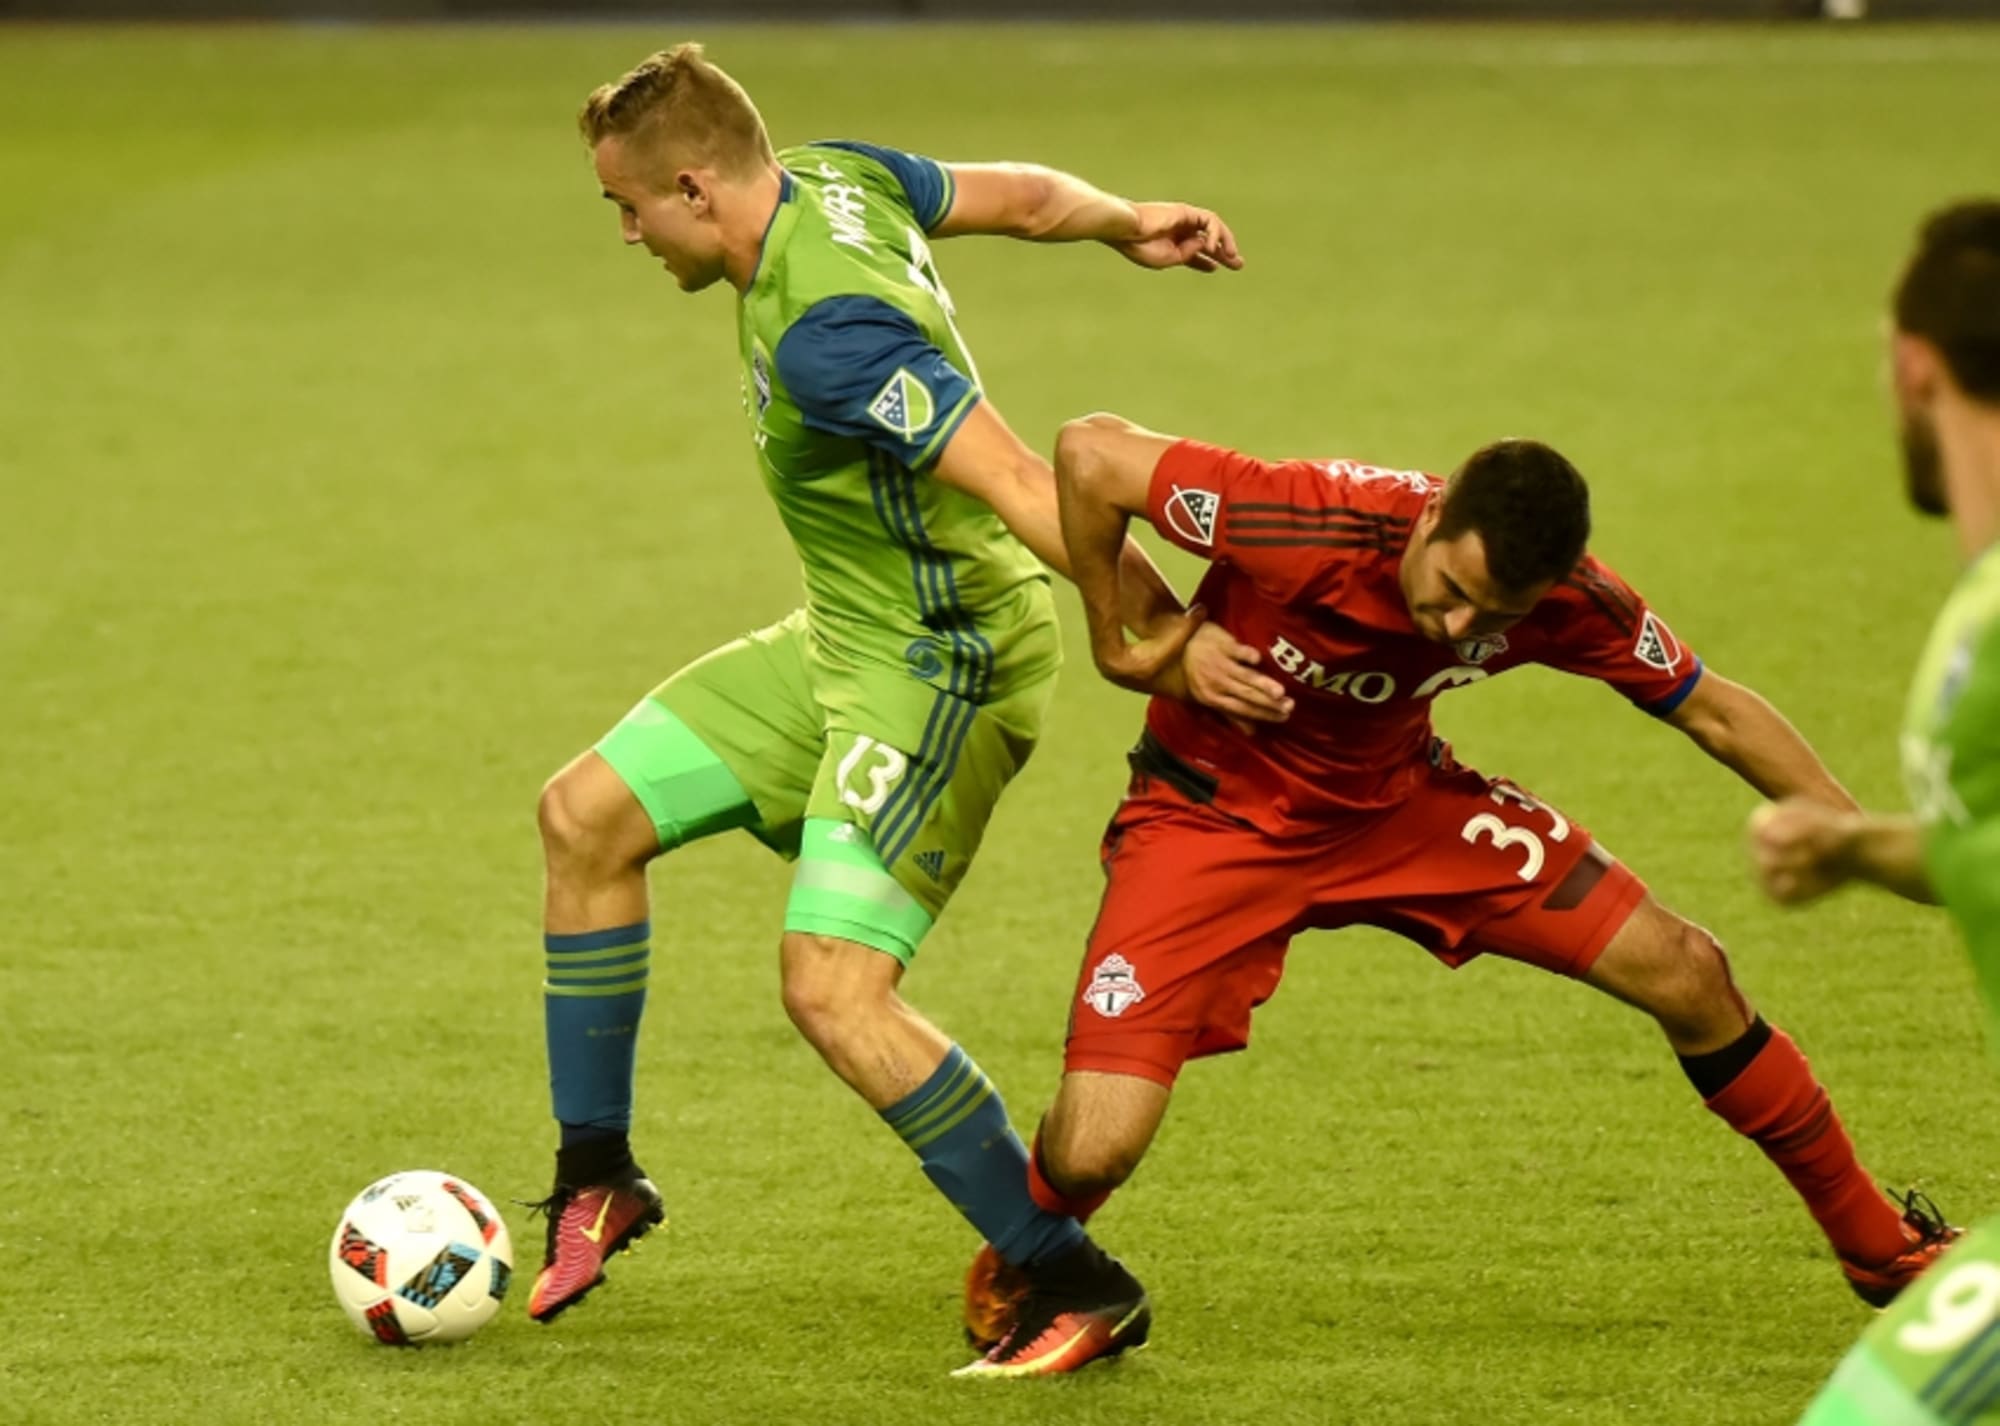 Seattle Sounders: 4 Takeaways from the 2017 Schedule